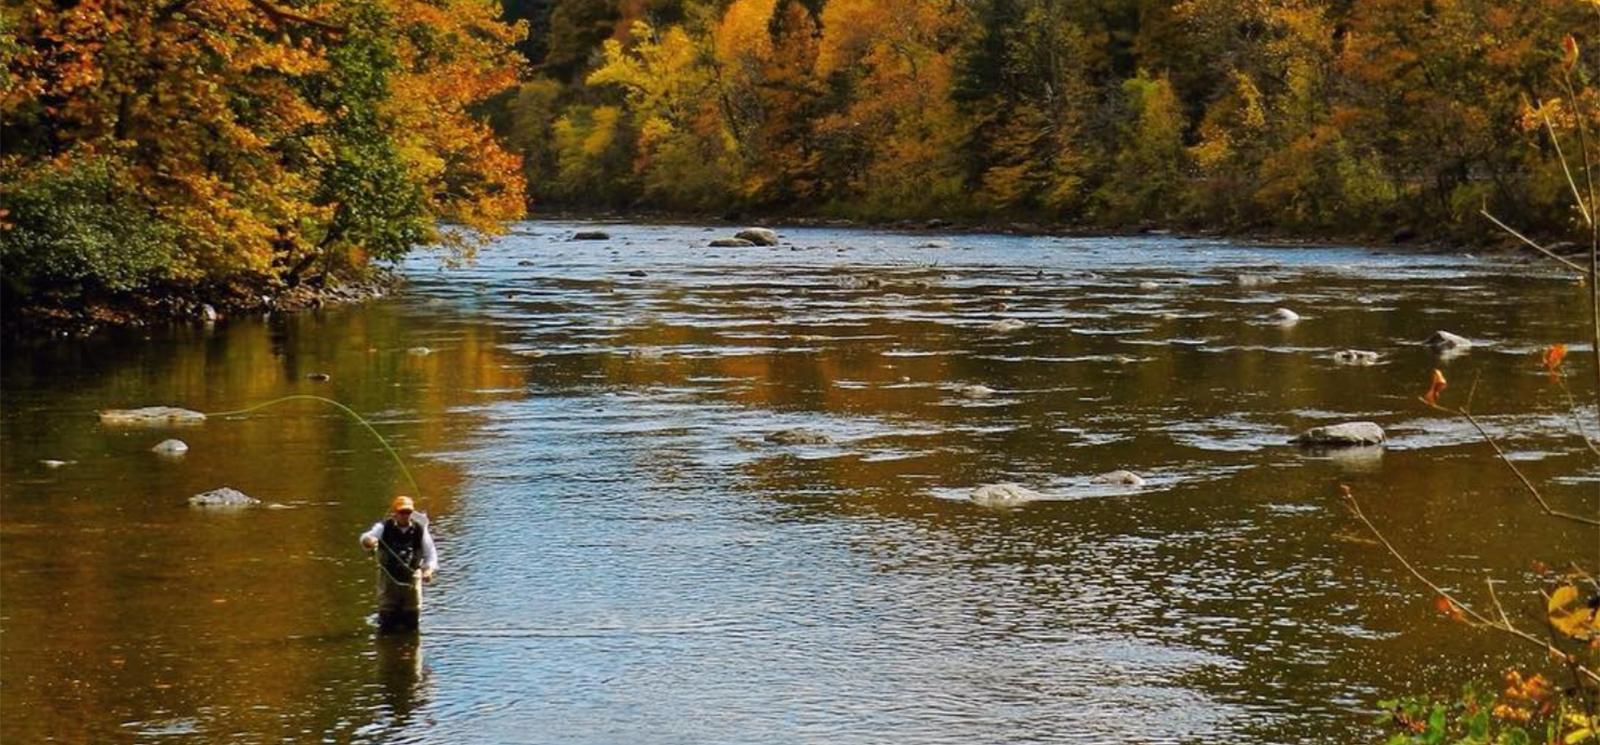 A man flyfishing in a river in the fall (Instagram@globetrotterscommunity)